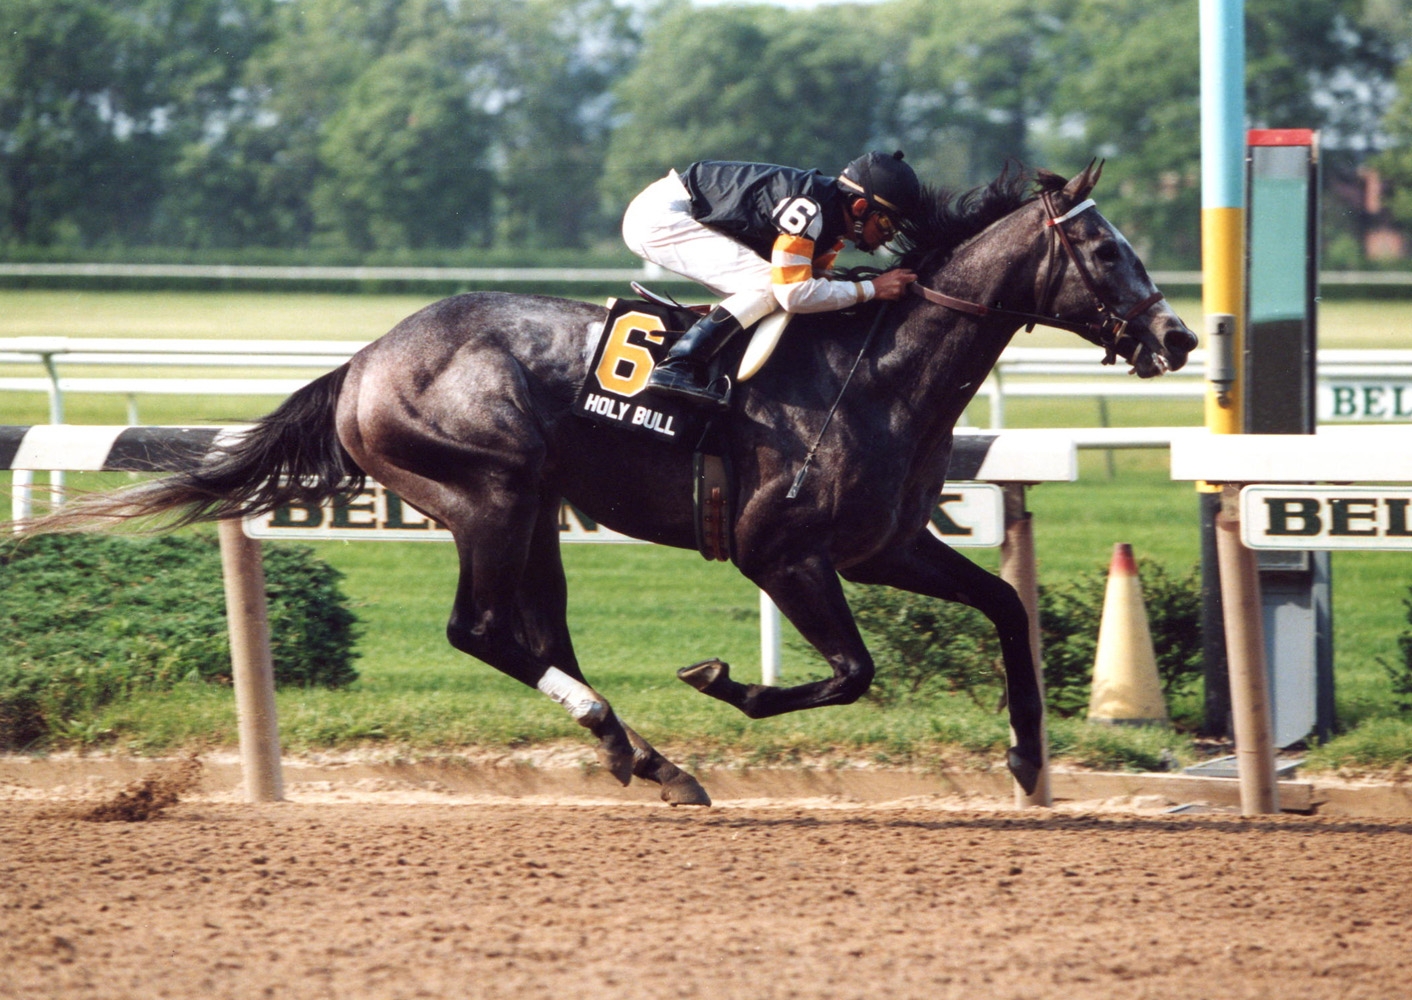 Holy Bull (Mike Smith up) winning the 1994 Metropolitan Handicap at Belmont Park (Barbara D. Livingston/Museum Collection)